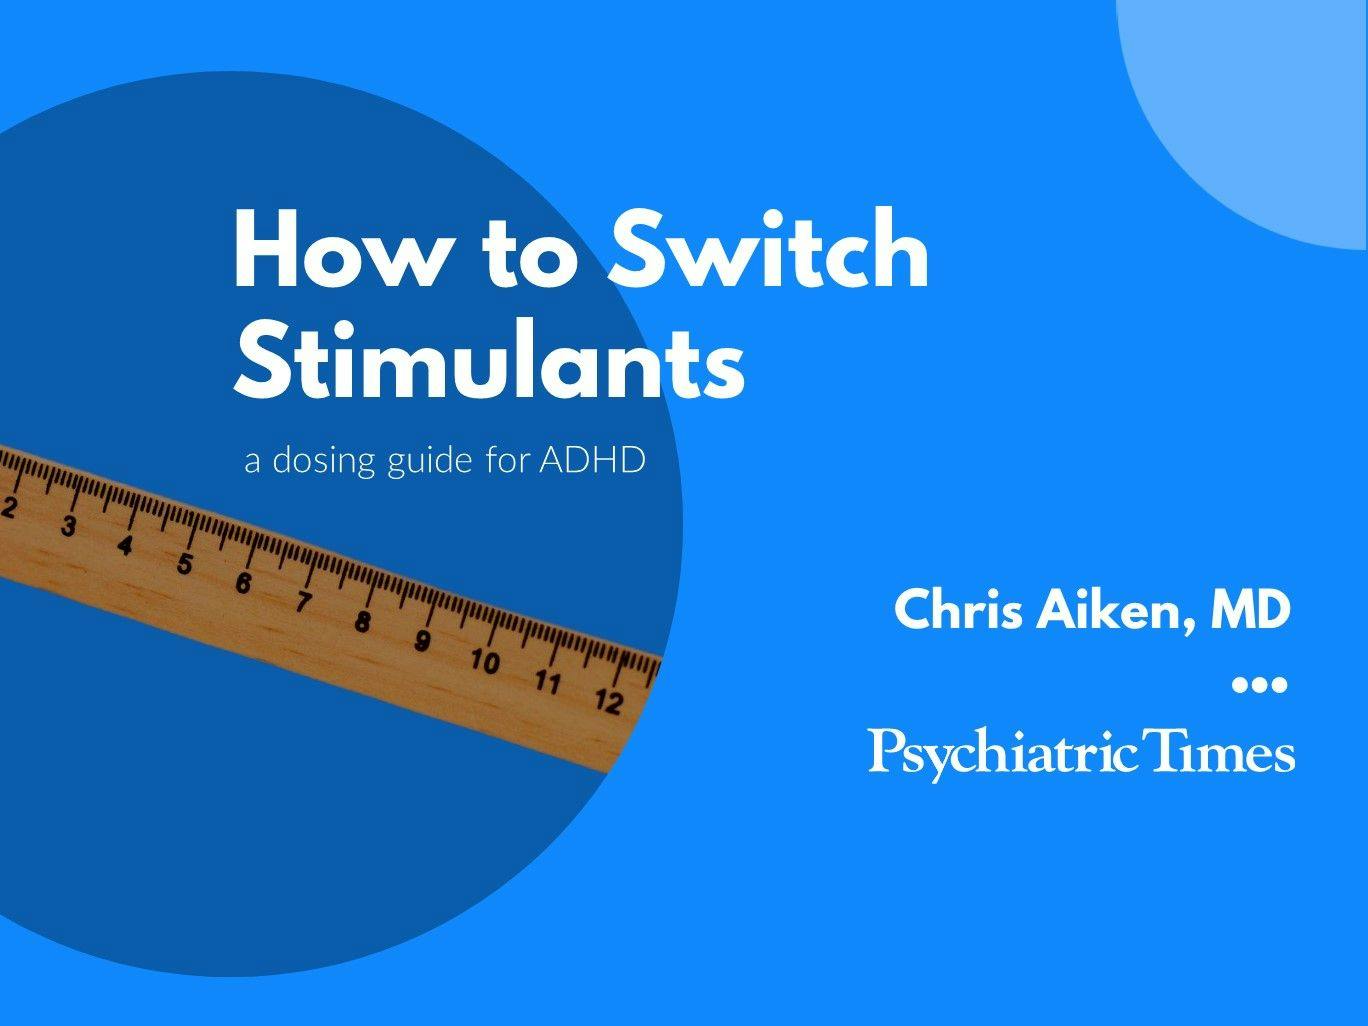 How to Switch Stimulants: A Dosing Guide for ADHD